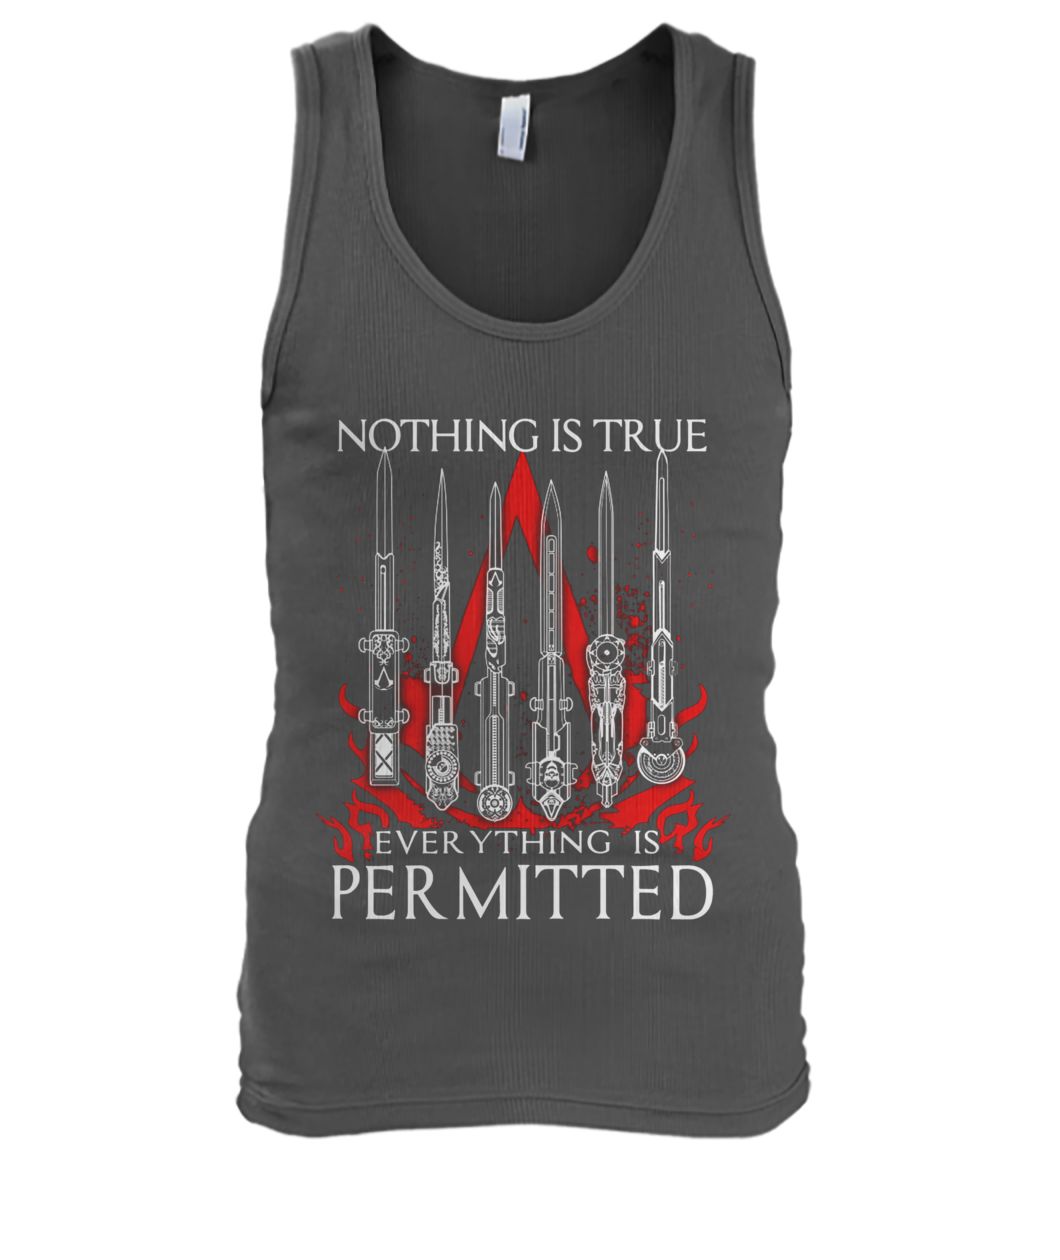 Assassin's creed nothing is true everything is permitted men's tank top